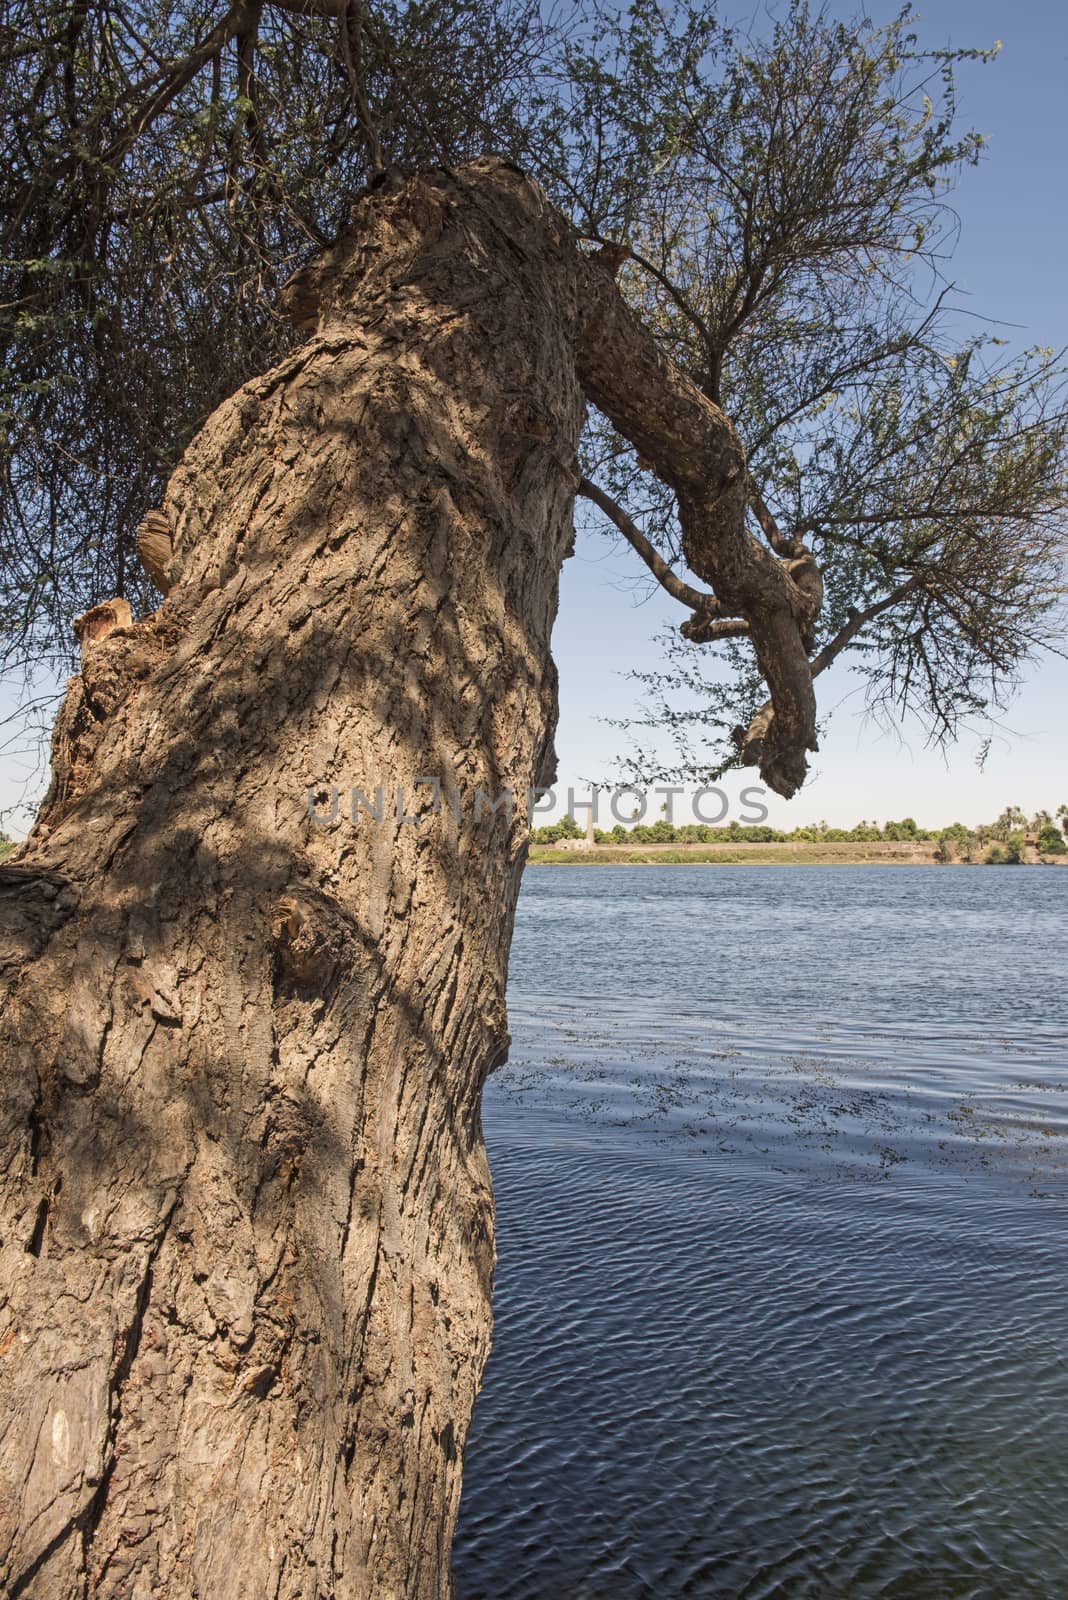 Close-up detail of large curved tree trunk hanging out over wide river water